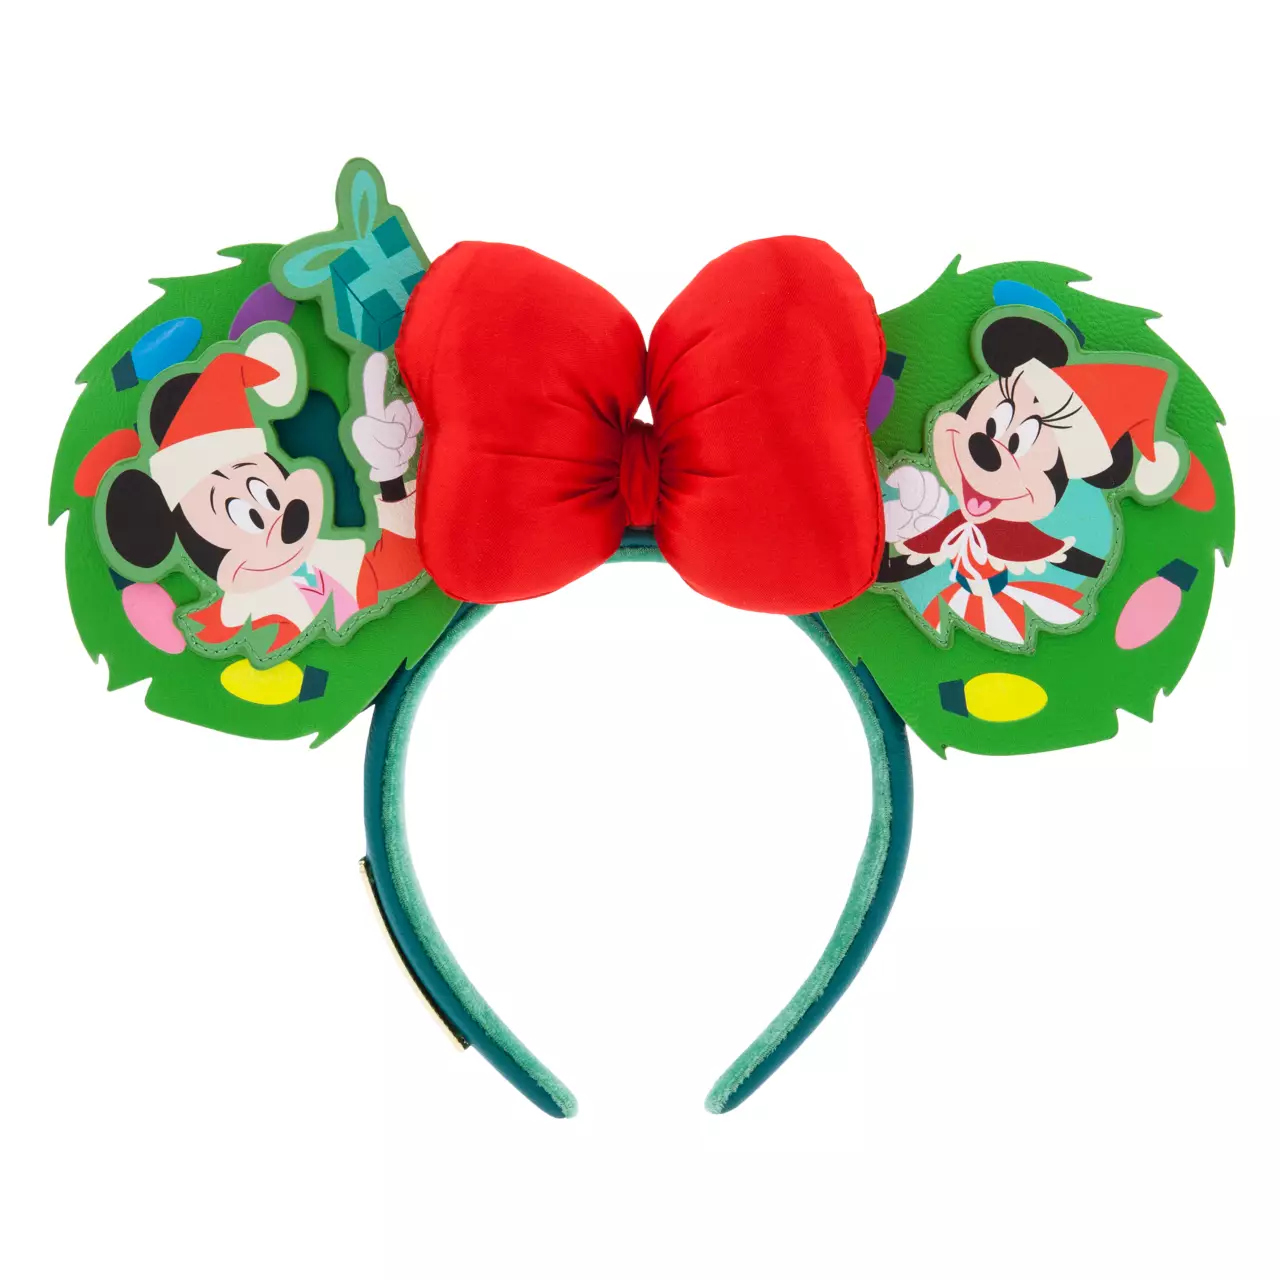 Disney Christmas Products